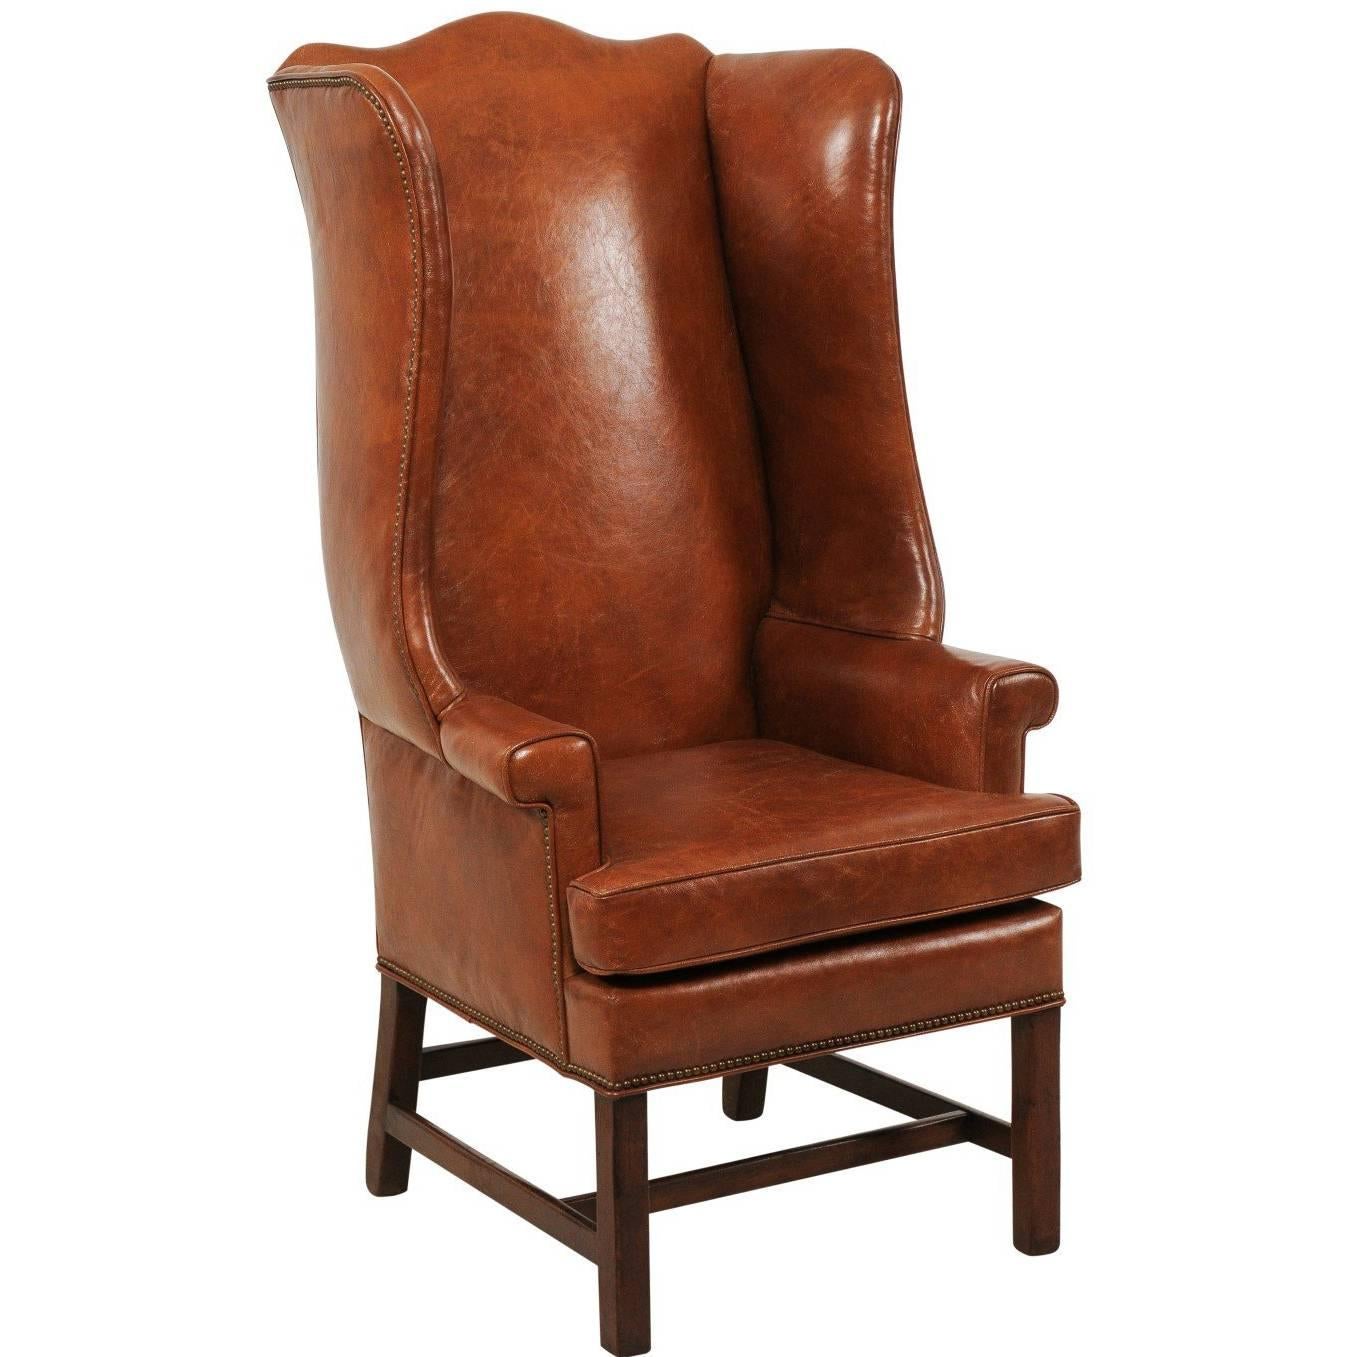 Midcentury Brown Leather Wingback Chair, Antique Leather Wingback Chair